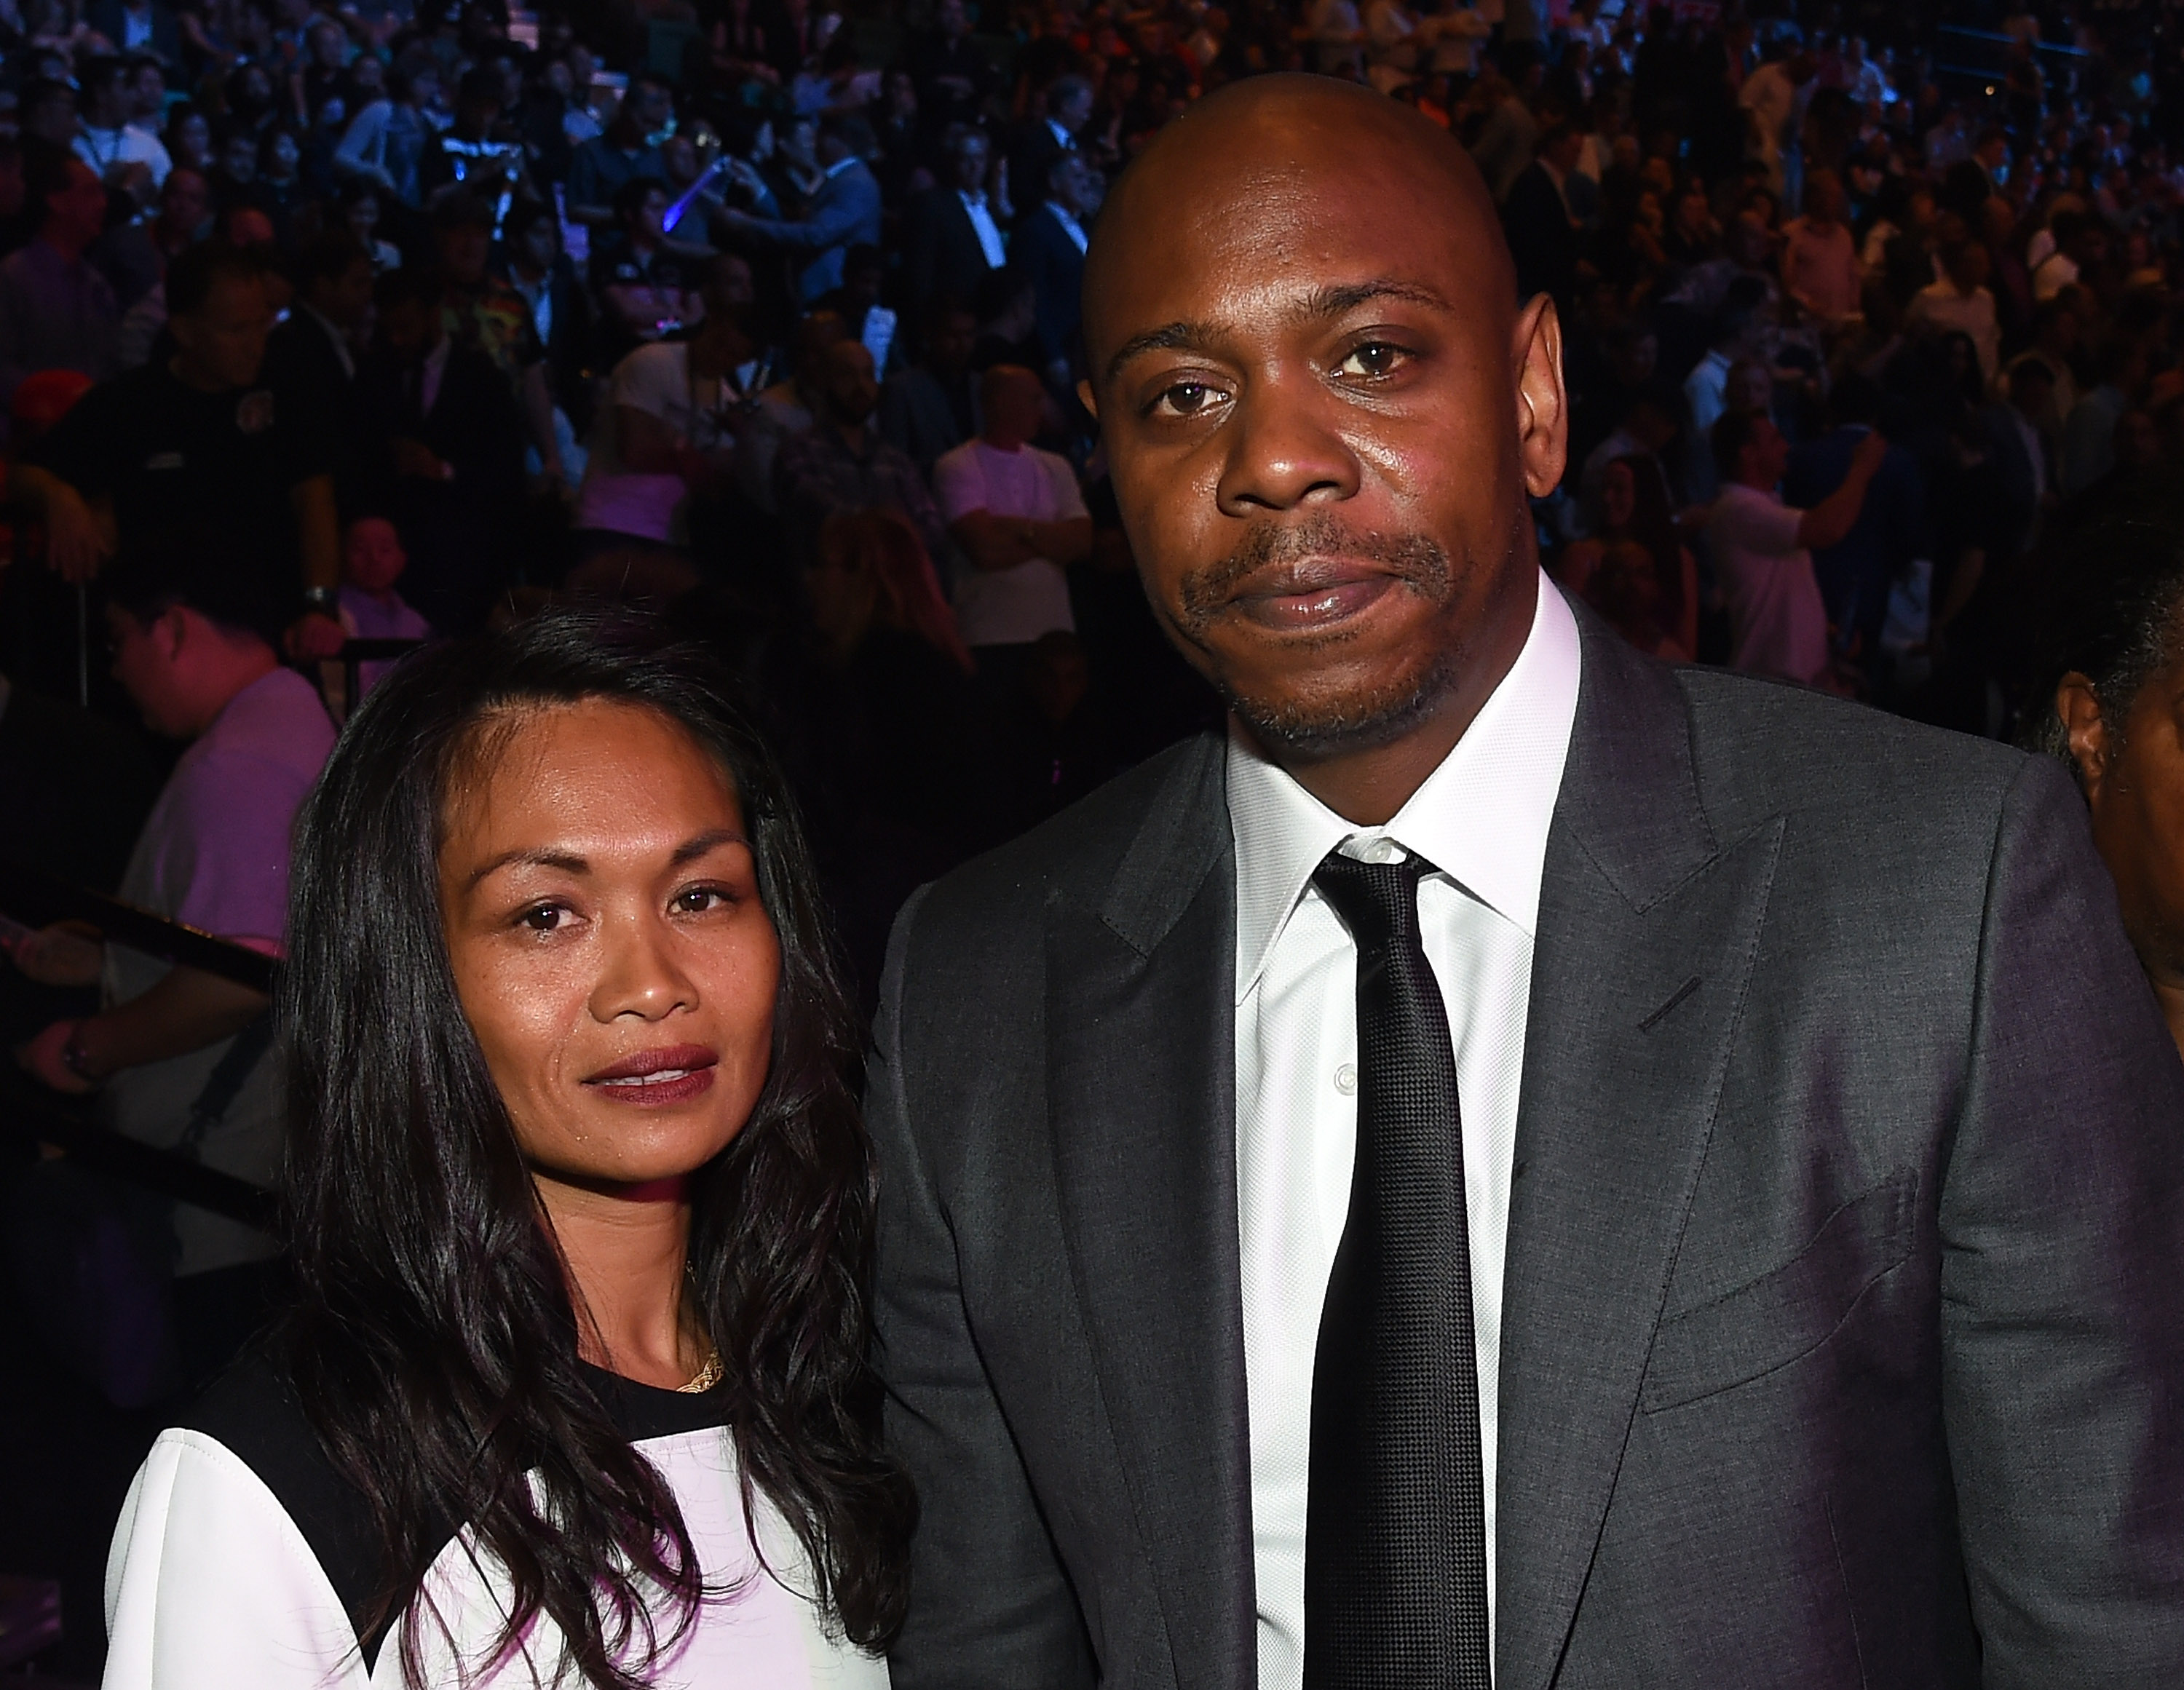 Elaine Chappelle, Dave Chappelle's Wife 5 Fast Facts